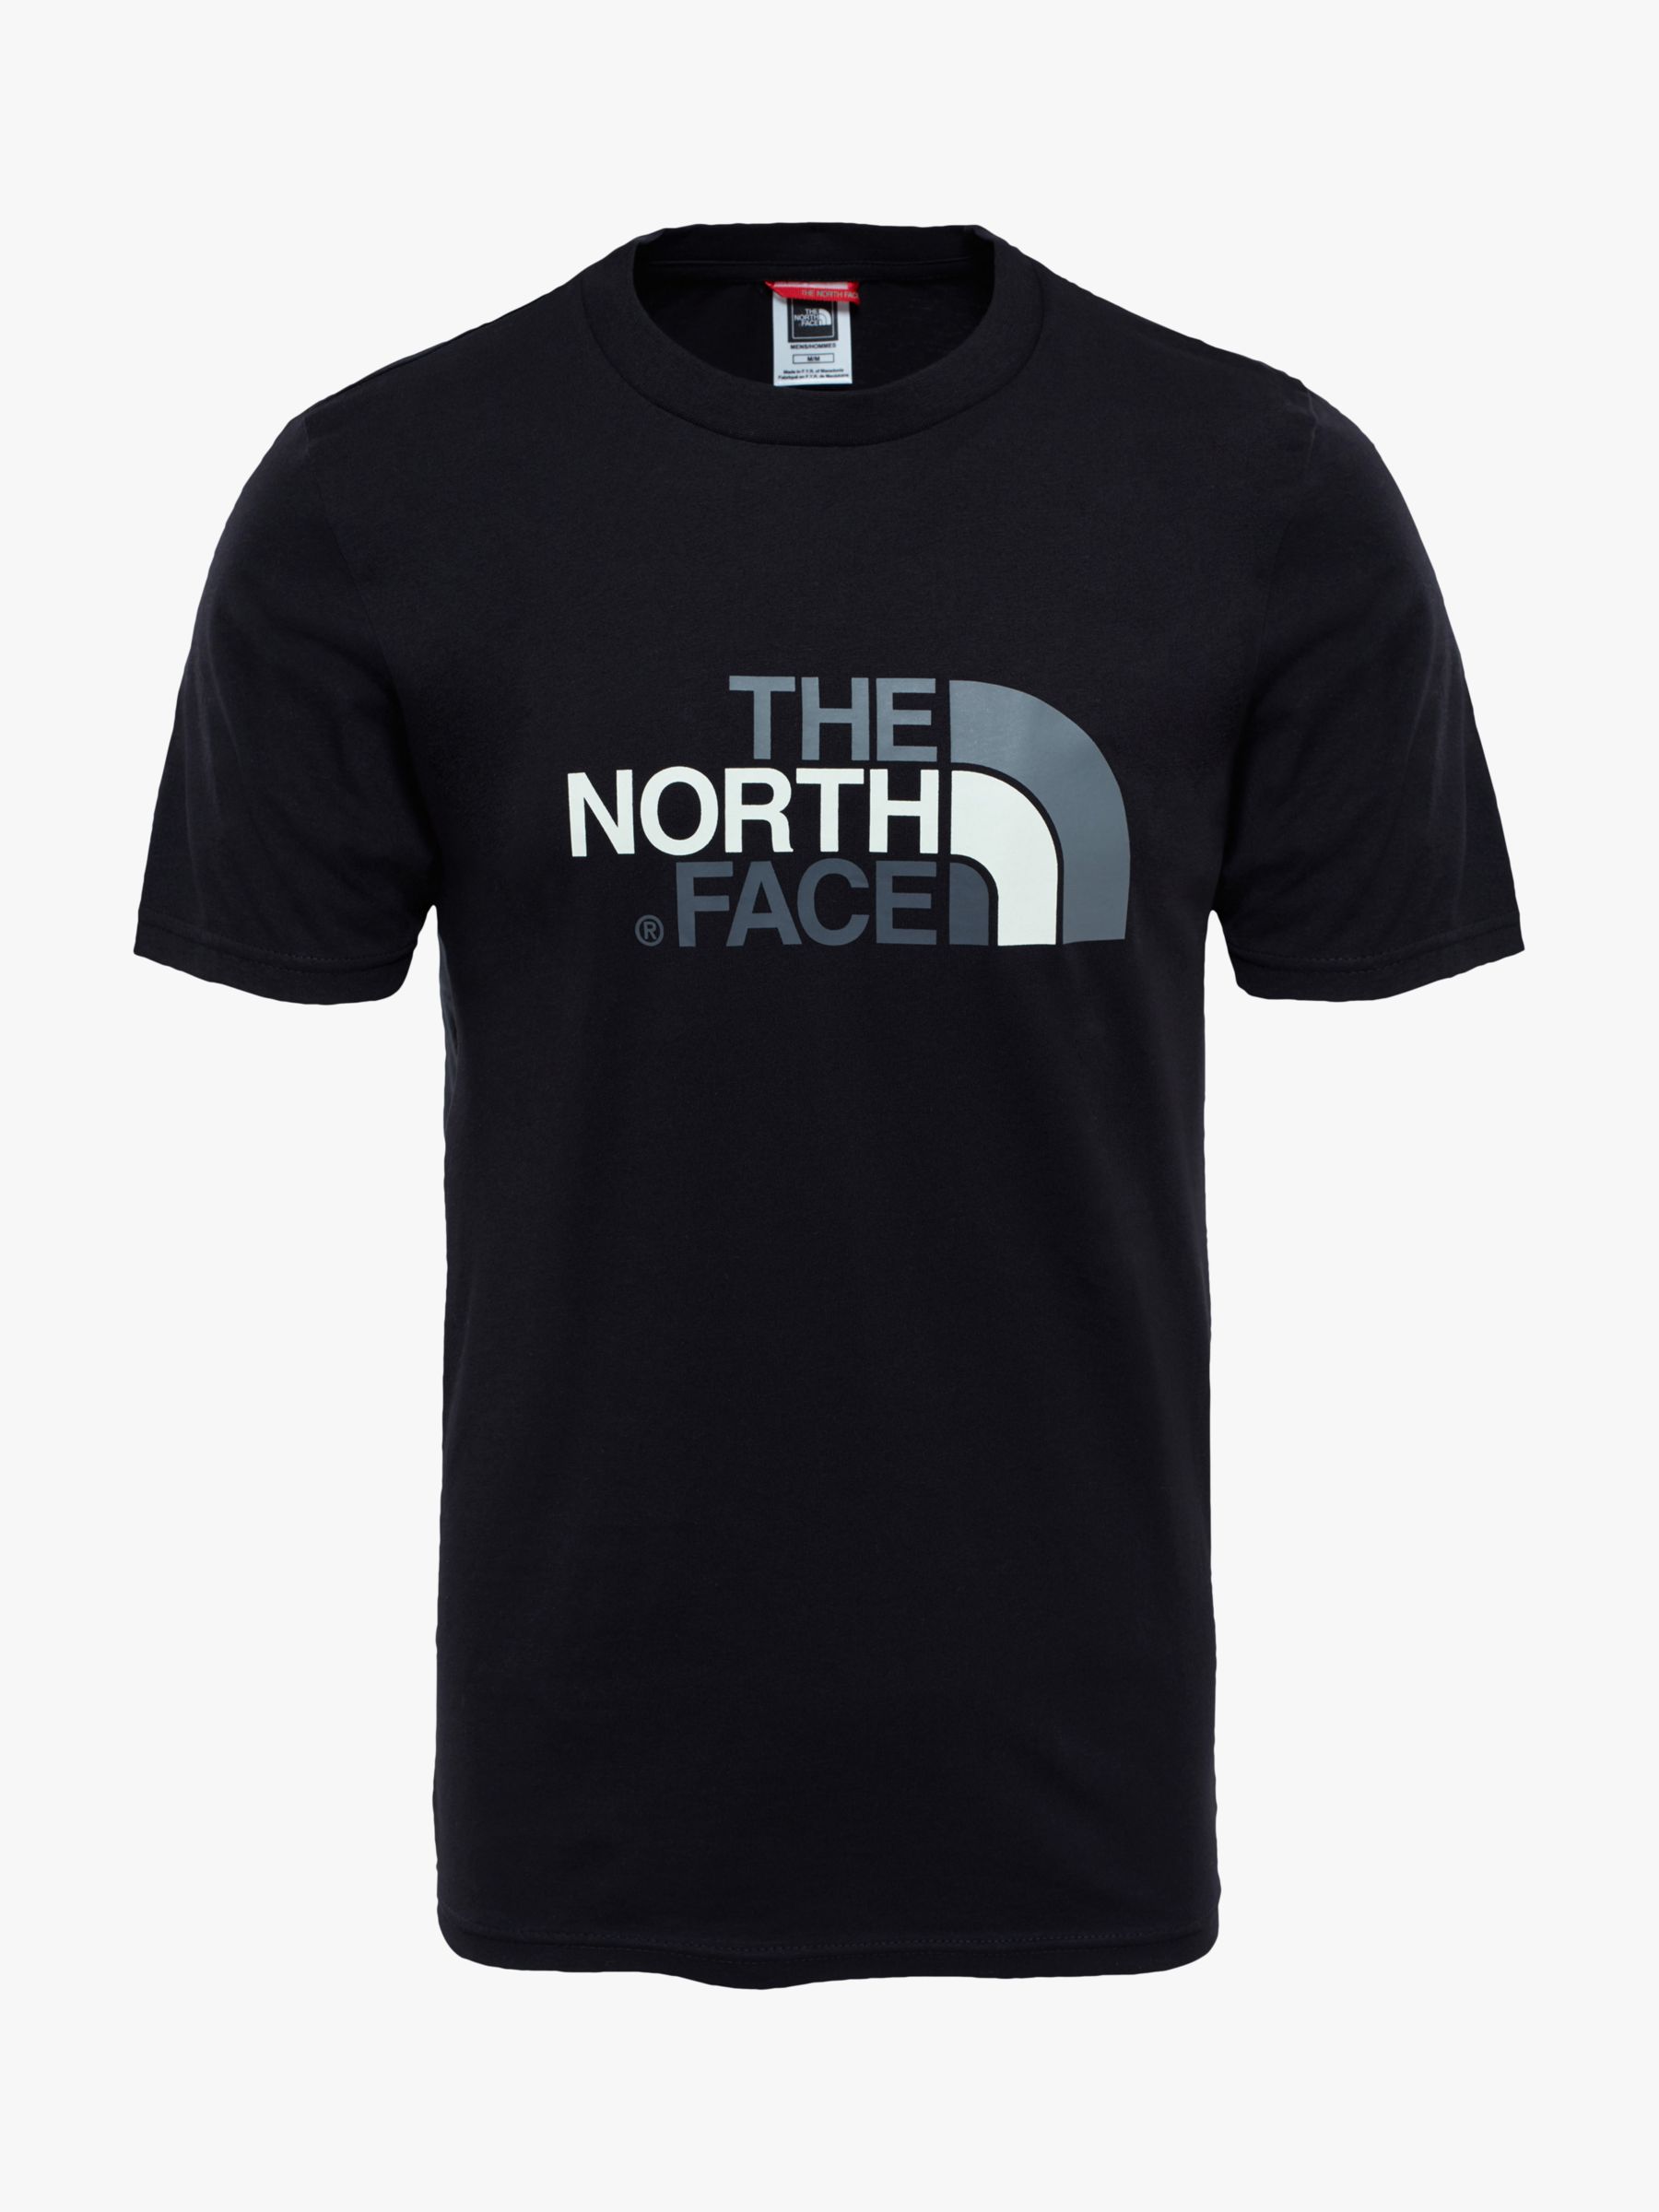 The North Face Easy Short Sleeve T-Shirt, Black at John Lewis & Partners